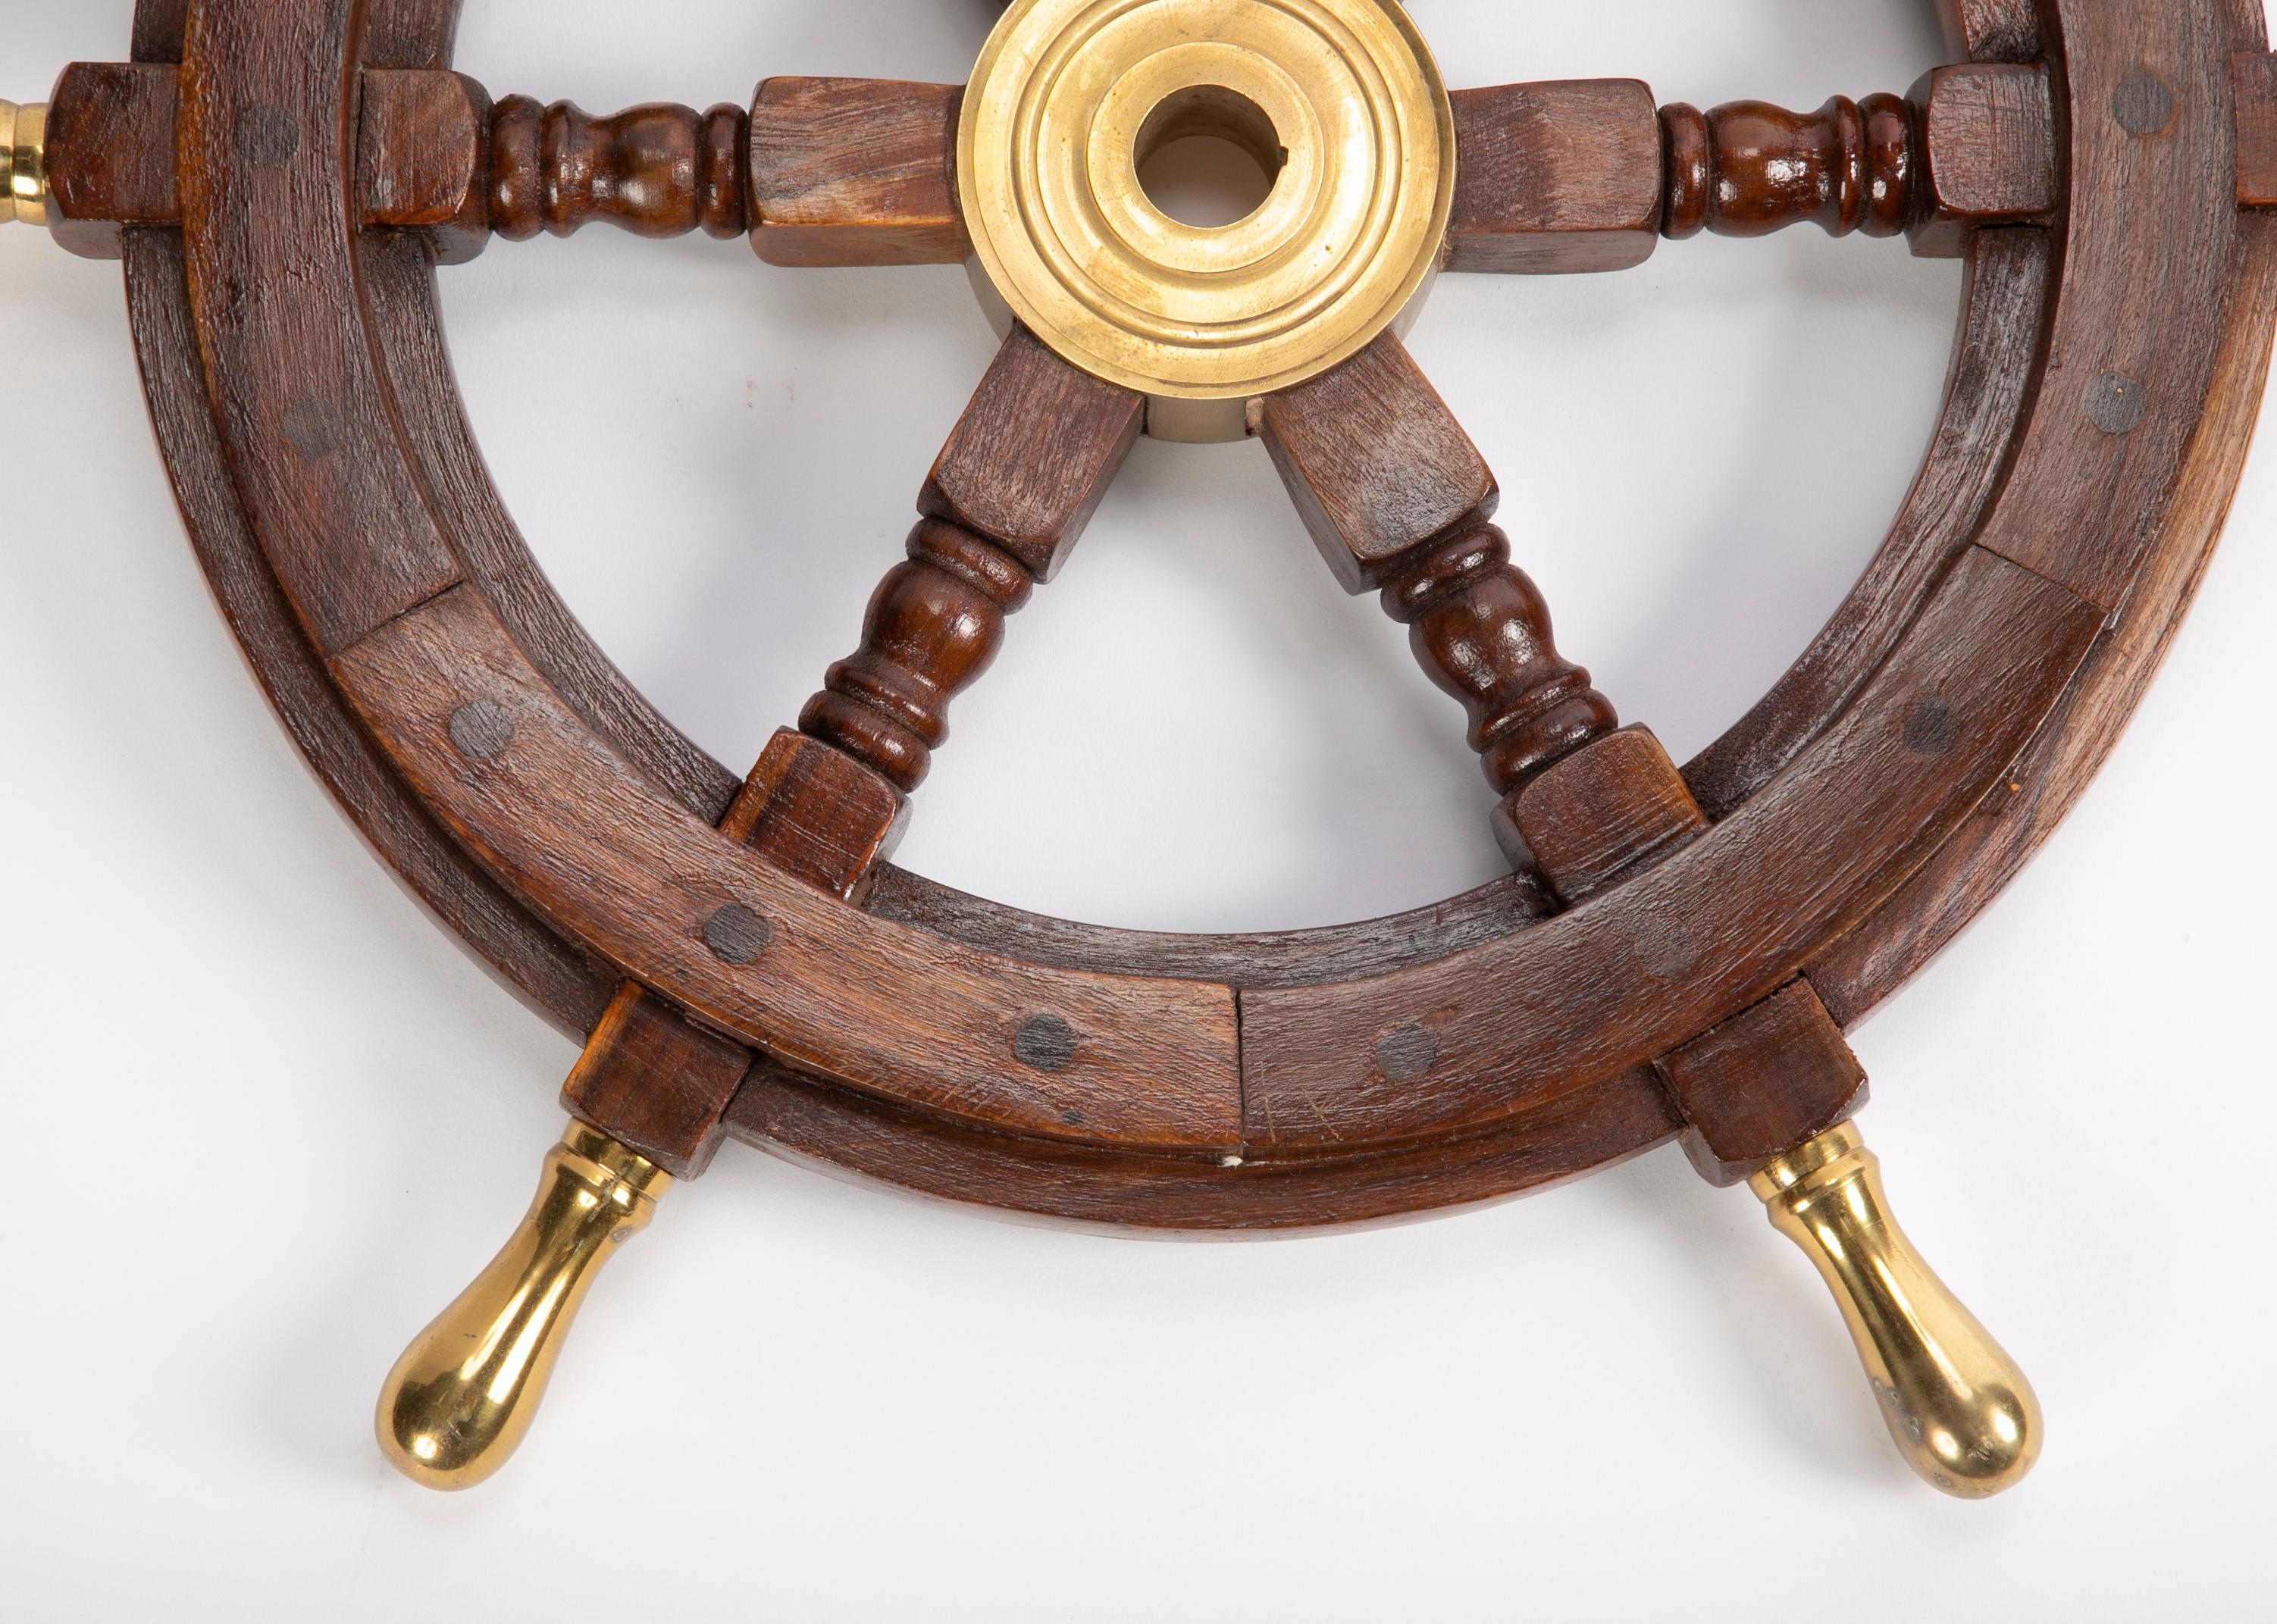 Hand-Crafted Large Wooden Ship's Wheel with Brass Accents For Sale